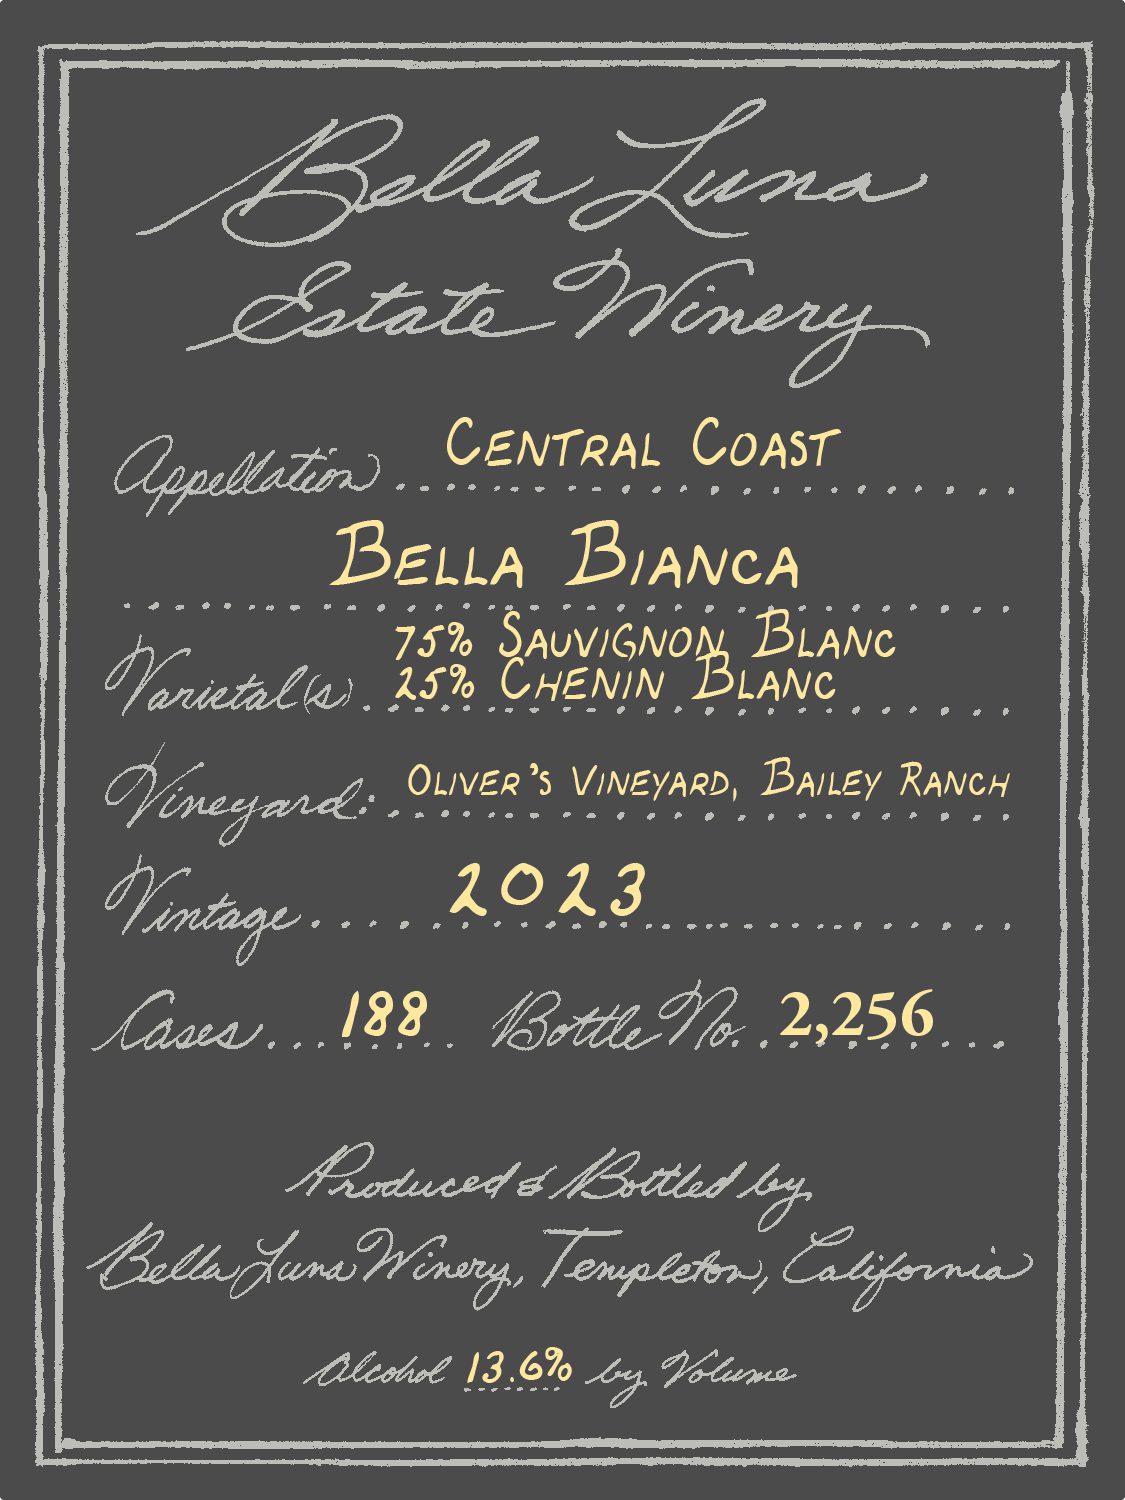 Indulge your senses with the 2022 Chardonnay from Bella Luna Estate Winery, a sensory journey crafted from the sun-kissed vines of Vista Verde Vineyard in San Benito County. This Chardonnay, nurtured in the embrace of Cropley, San Benito/Series (Clay Loam) soils, reflects the essence of its terroir. Grown on a charming hillside, the vines, matured for over two decades, infuse each sip with the wisdom of time. Let the golden elixir transport you to the picturesque vineyards and savor the delicate dance of flavors that define this exceptional vintage.